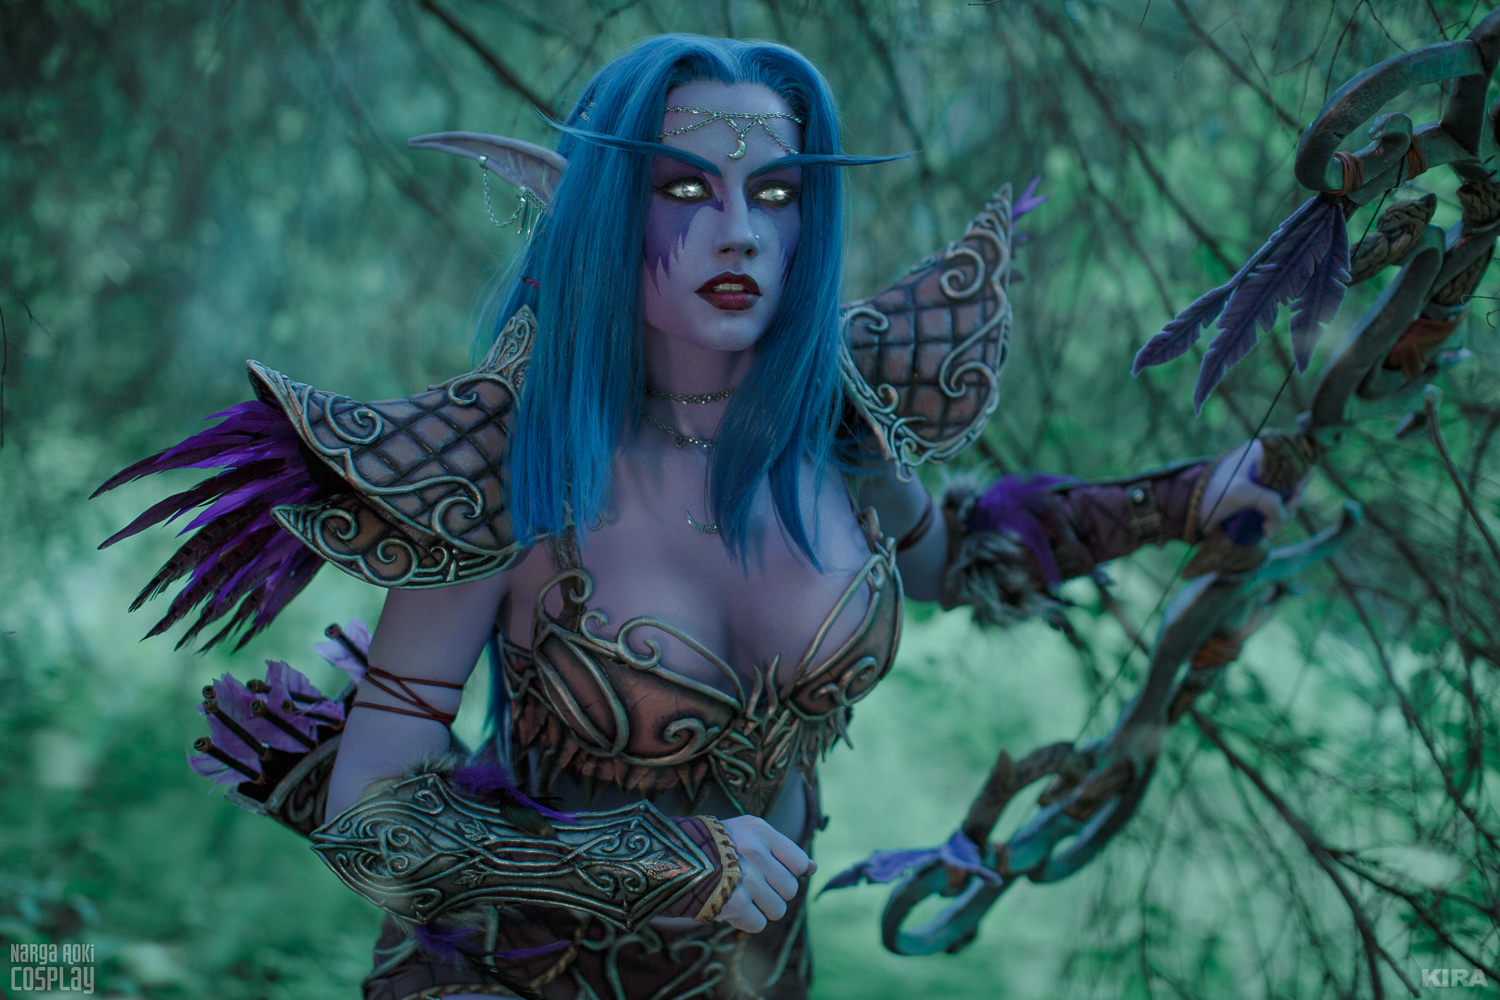 The Best World Of Warcraft Cosplay Has Real Owls